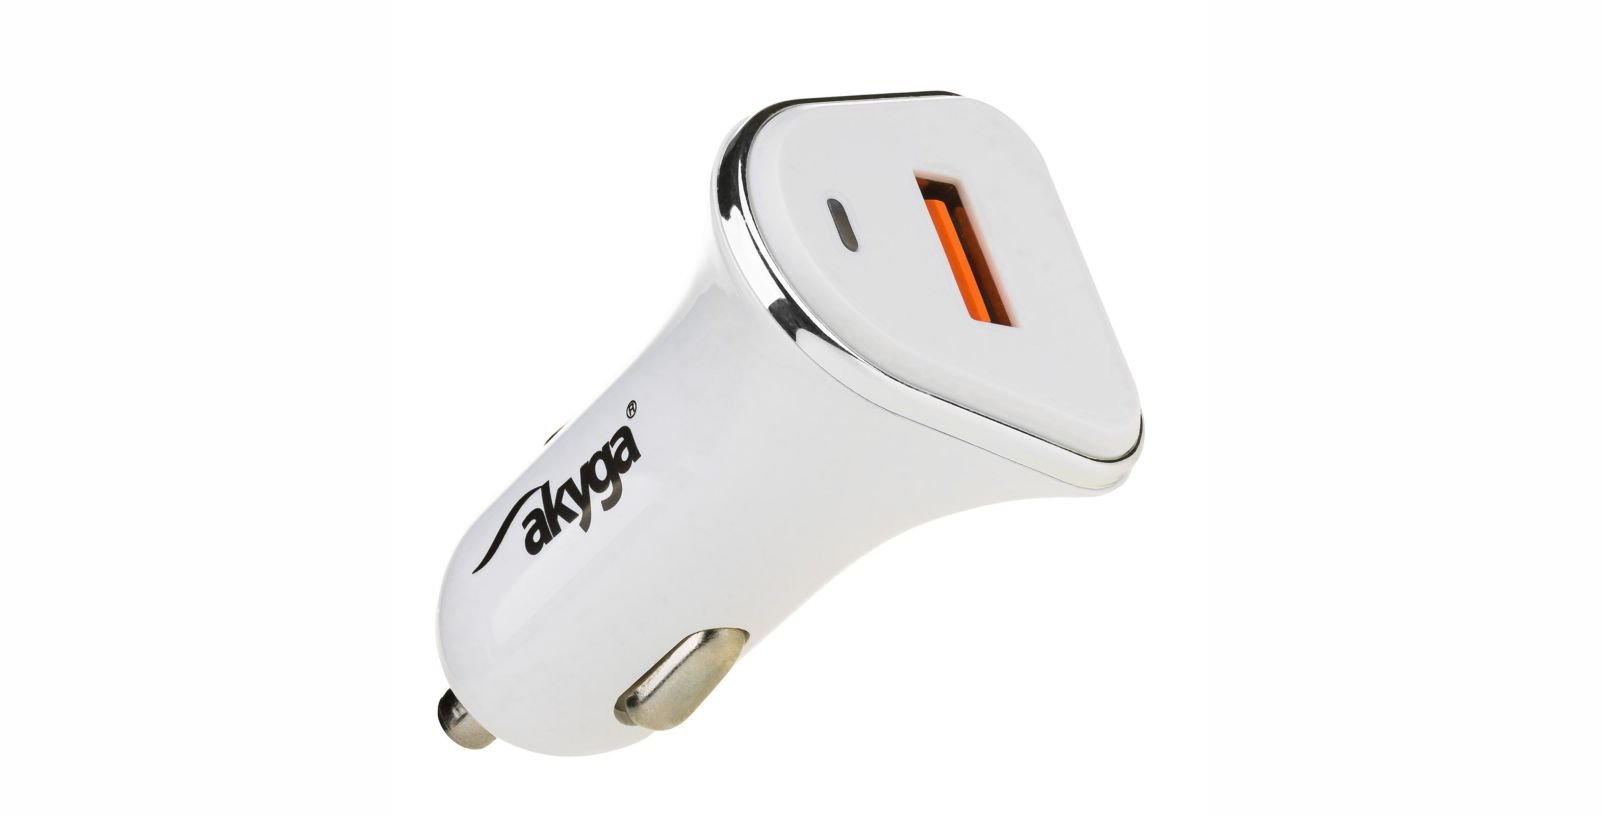 Akyga AK-CH-07 car charger with one USB type A Qualcomm Quick Charge QC 3.0 port